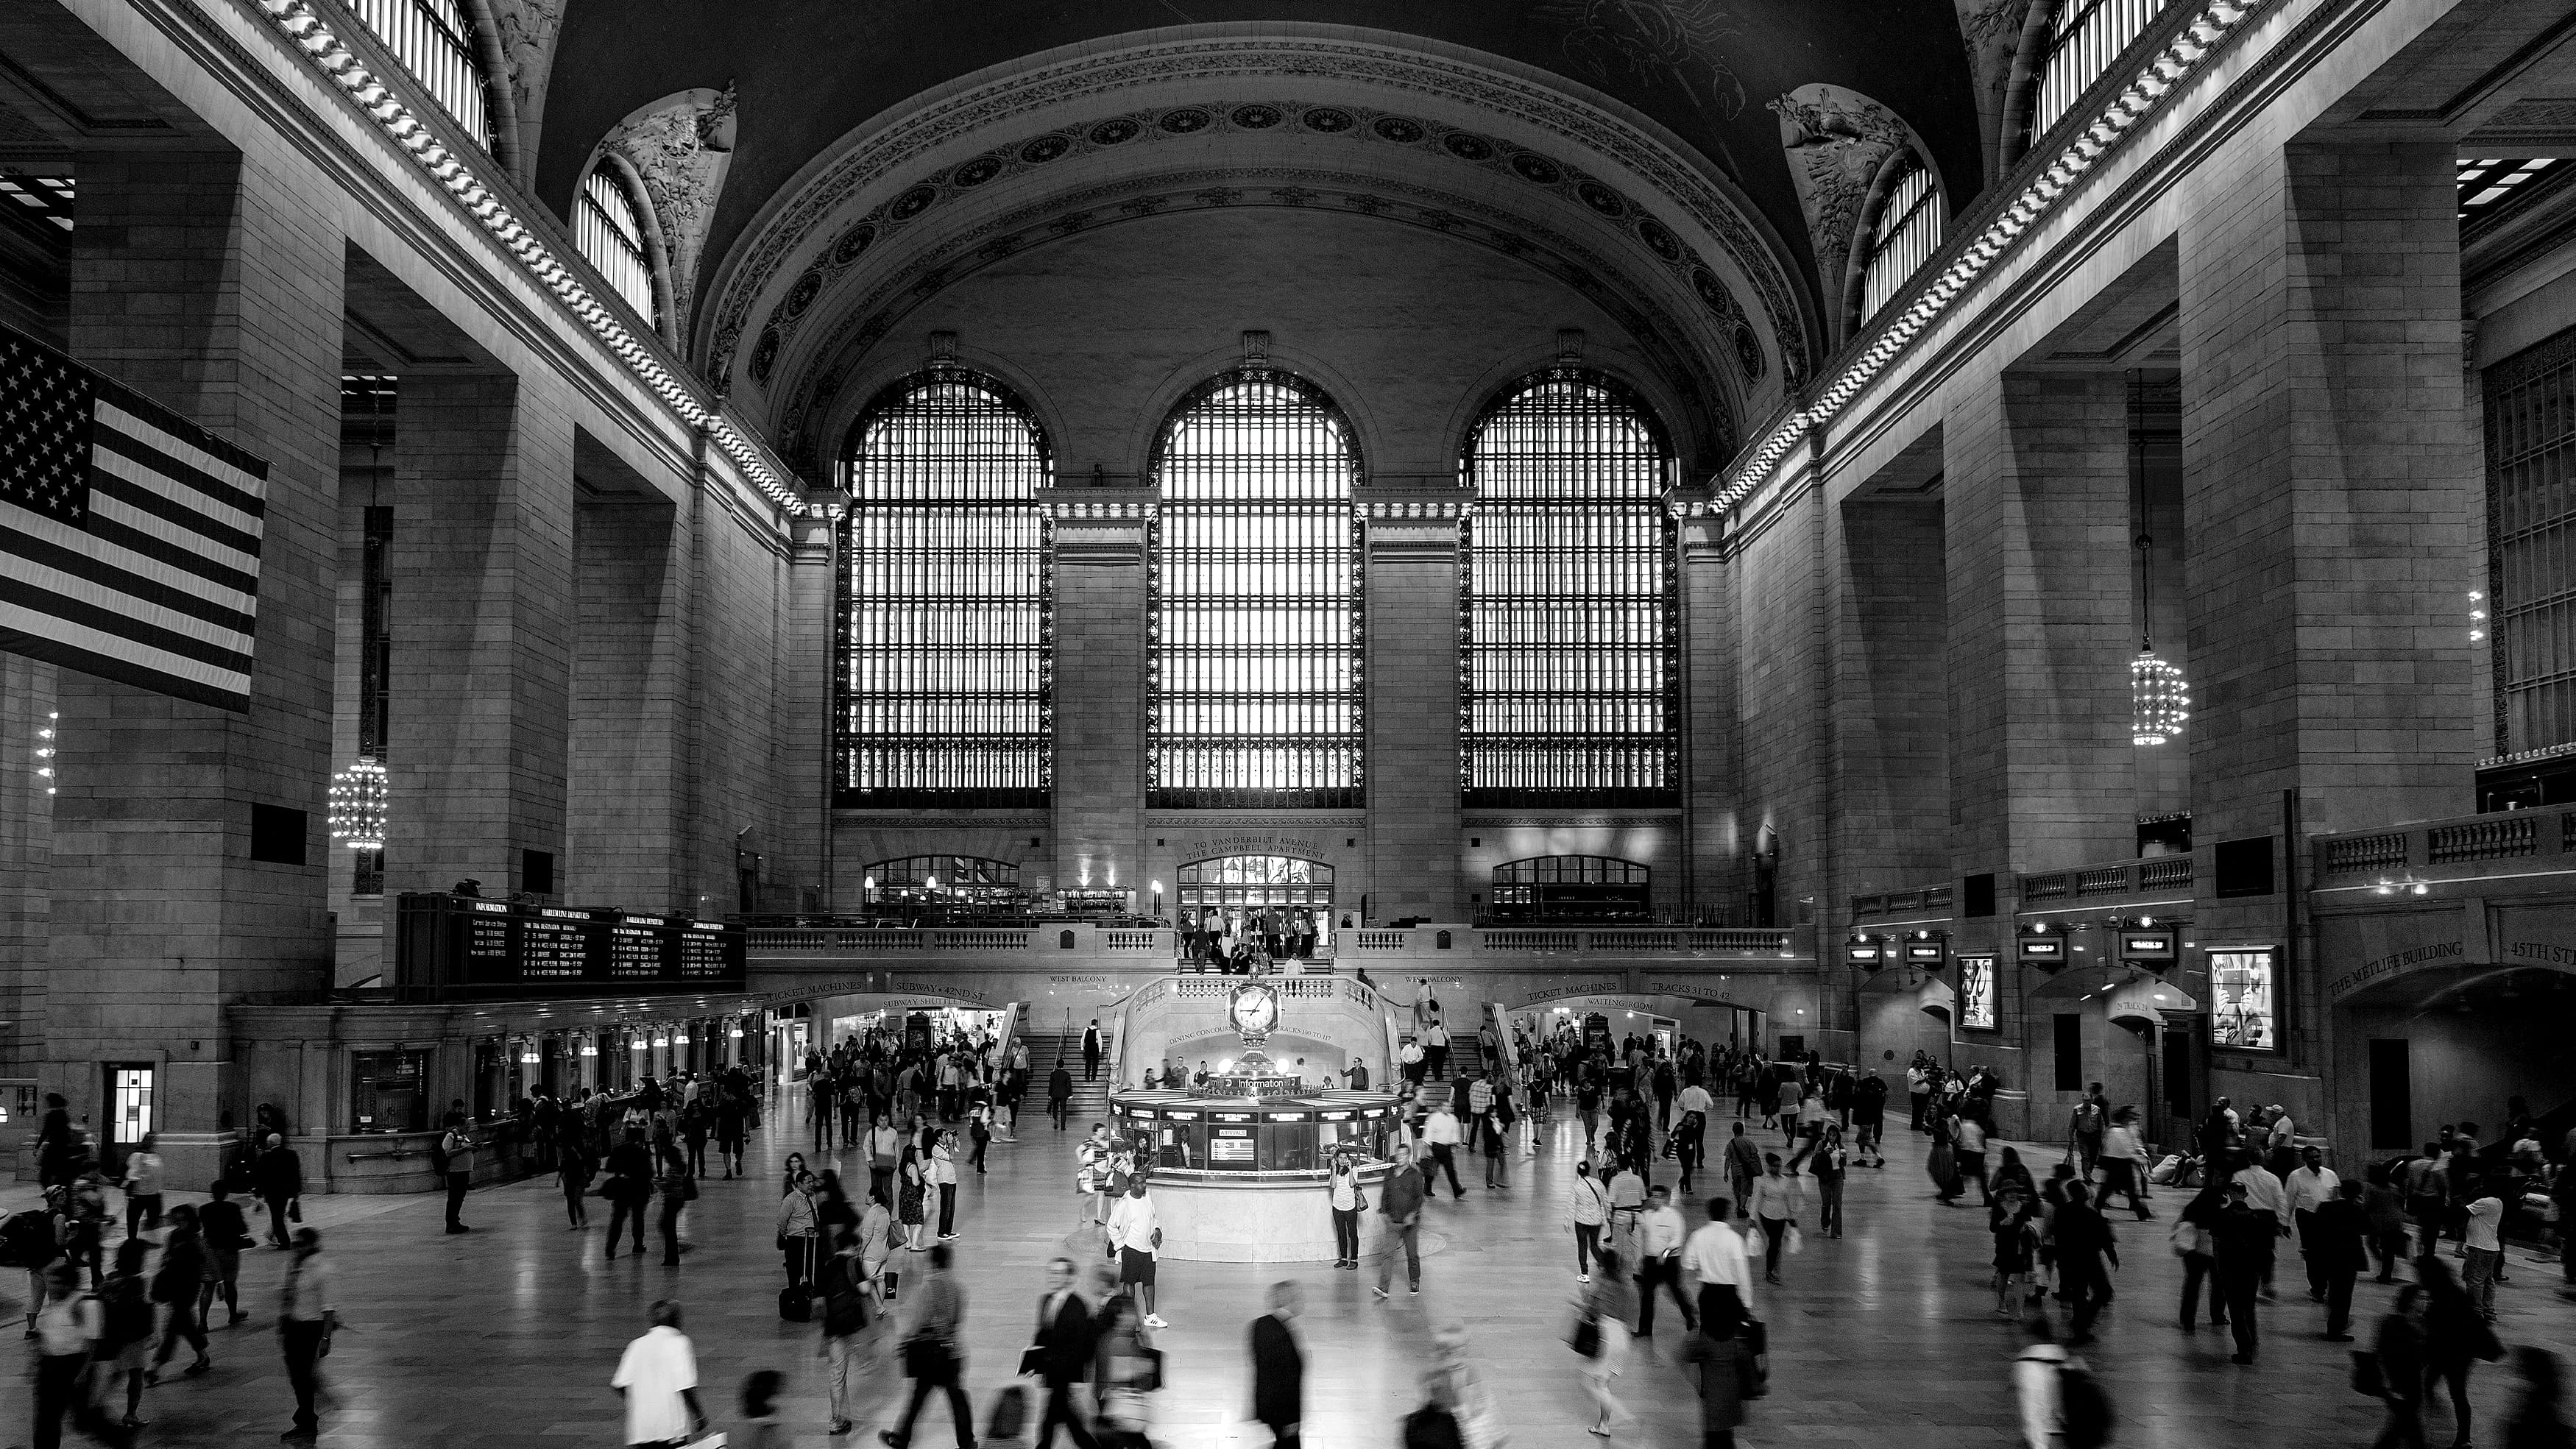 Black and white image of people walking through Grand Central Terminal in New York City